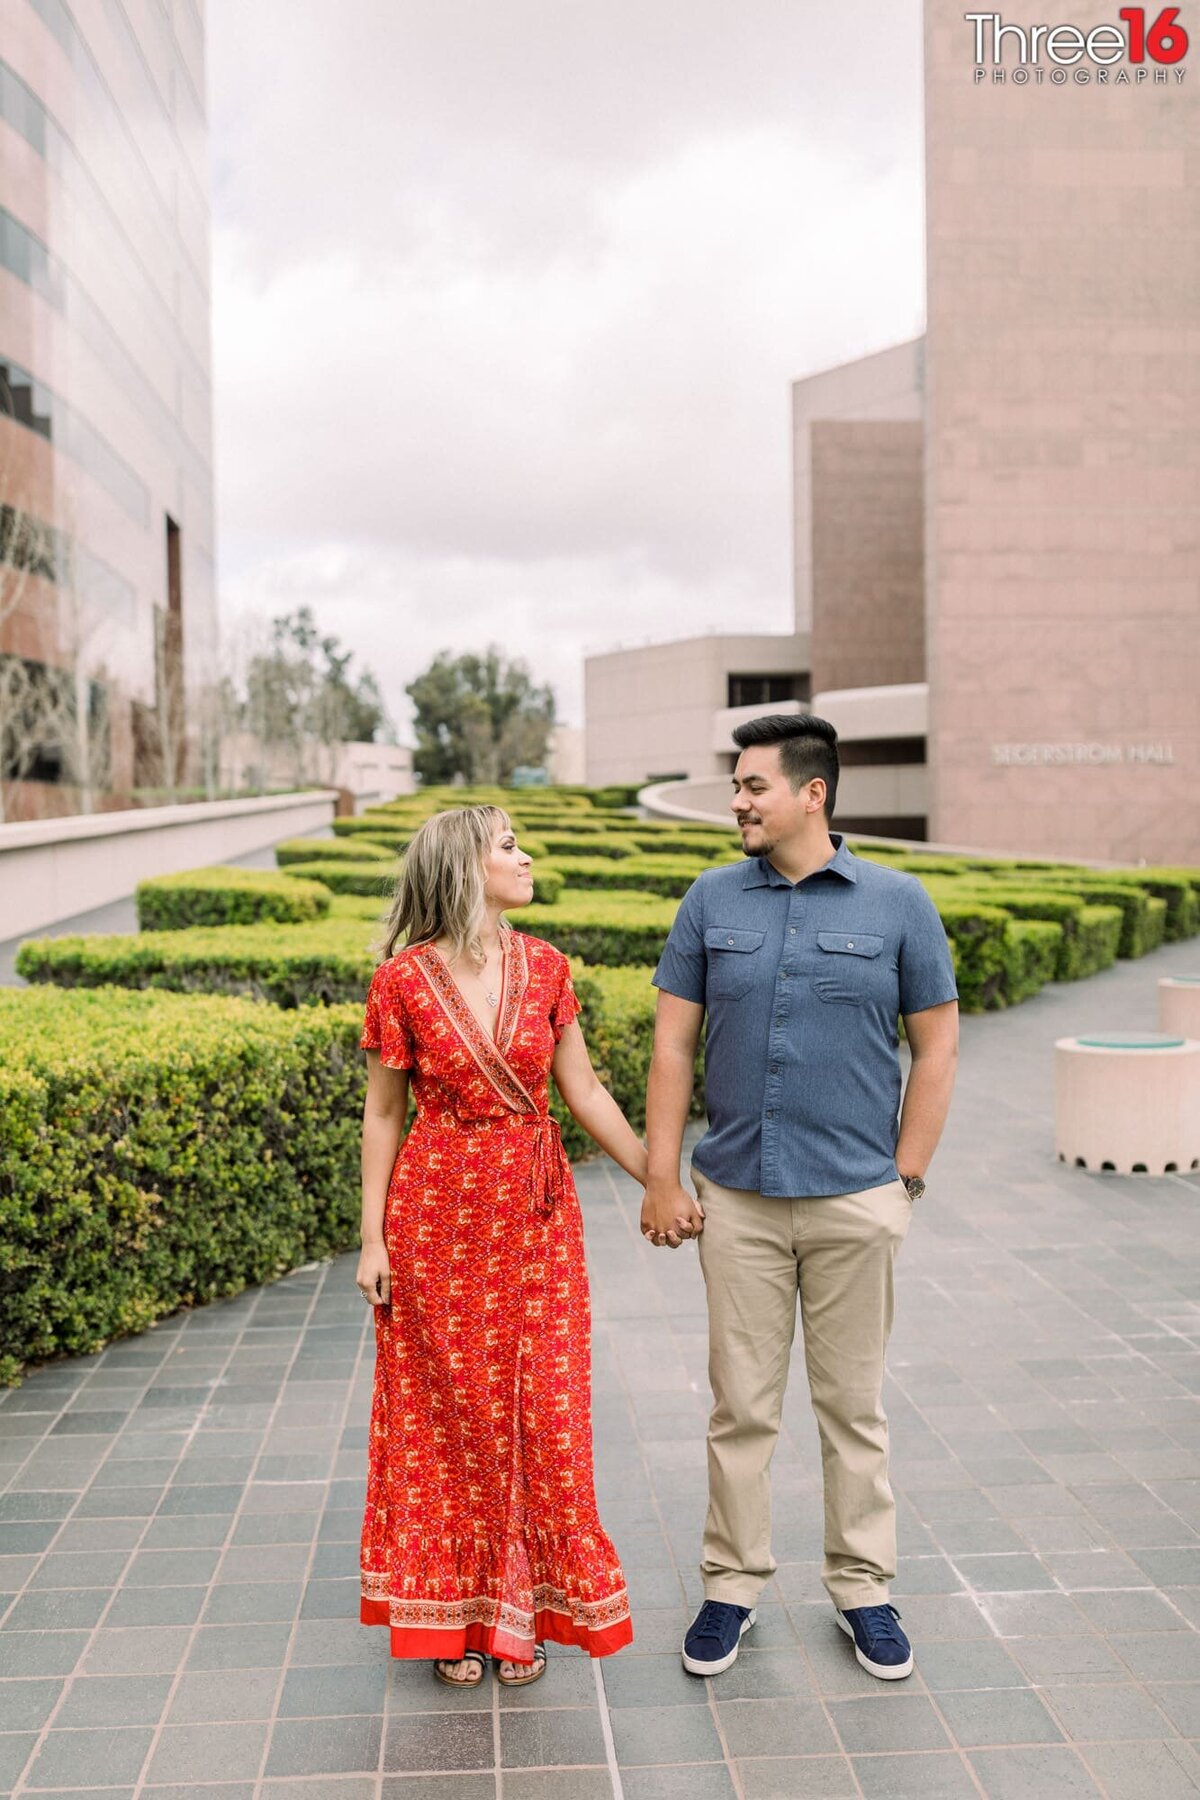 Engaged couple hold hands and look at each other during photo session